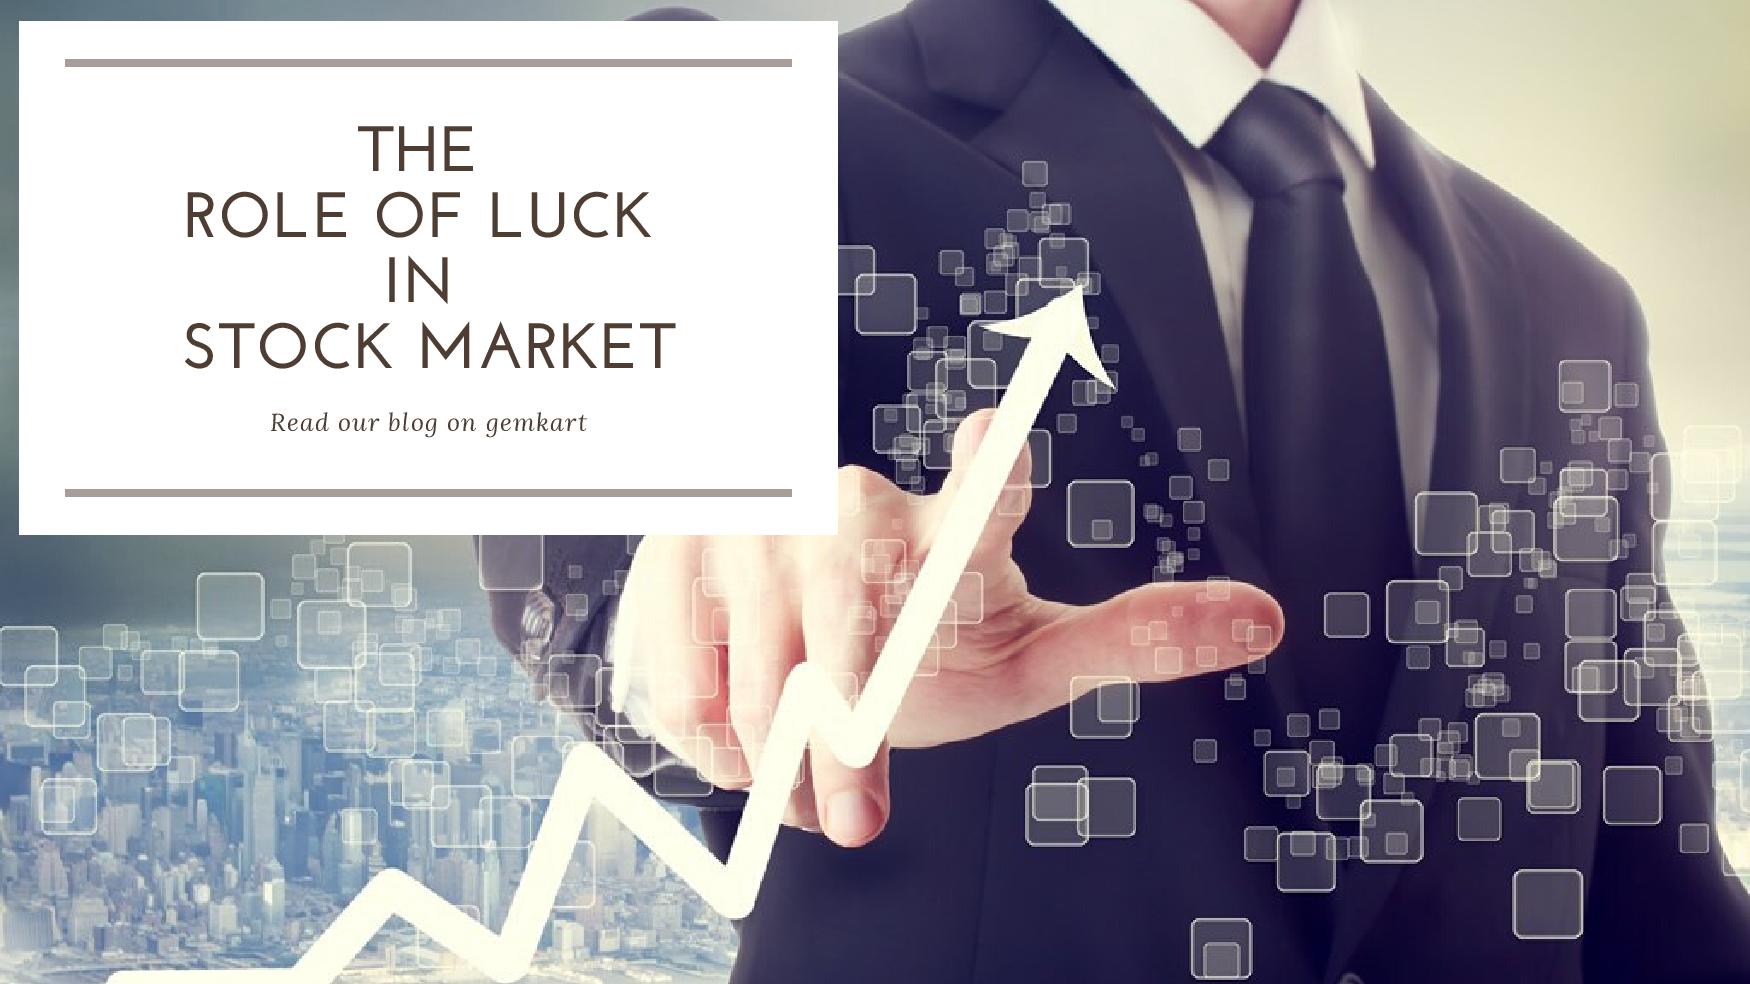 The Role of Luck in Stock Market